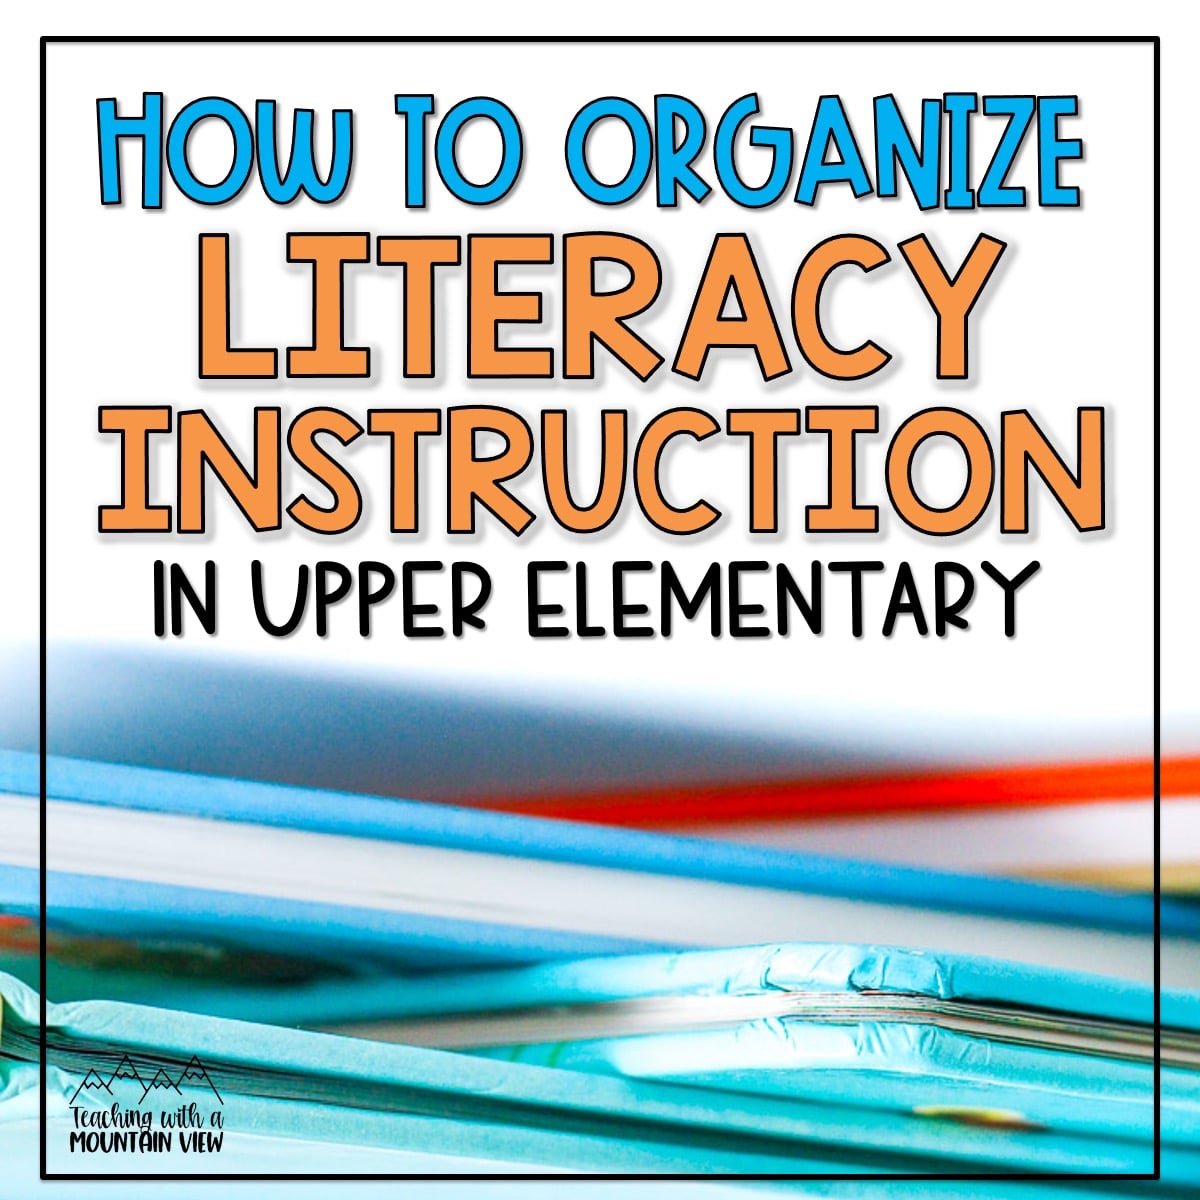 Tips for organizing your upper elementary literacy block. Includes daily routines, whole group lessons, and literacy rotations.